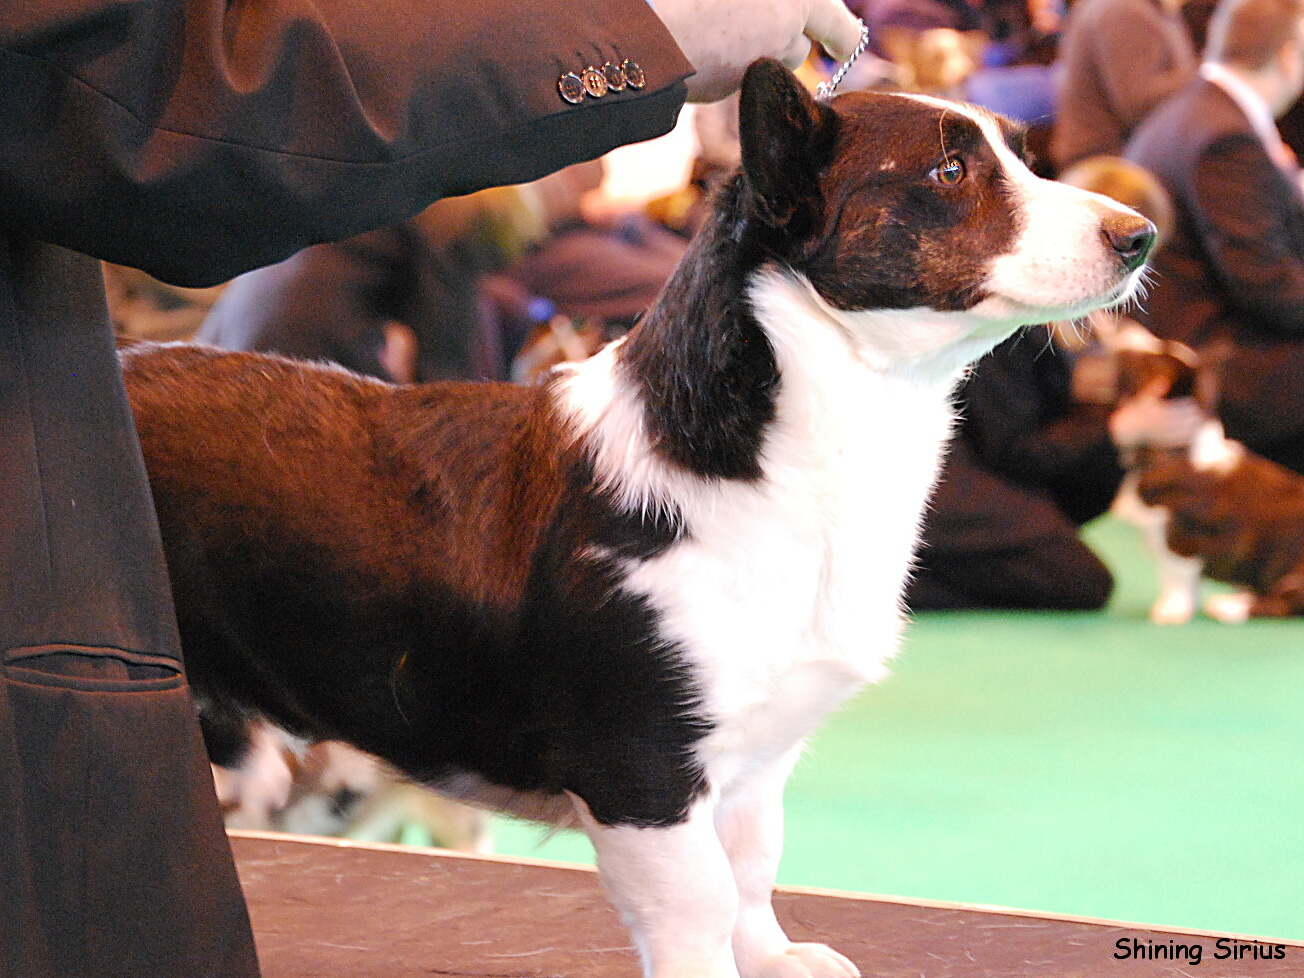 Crufts Jitka 269 Coco Chanel of Saint Hilaires Park.jpg